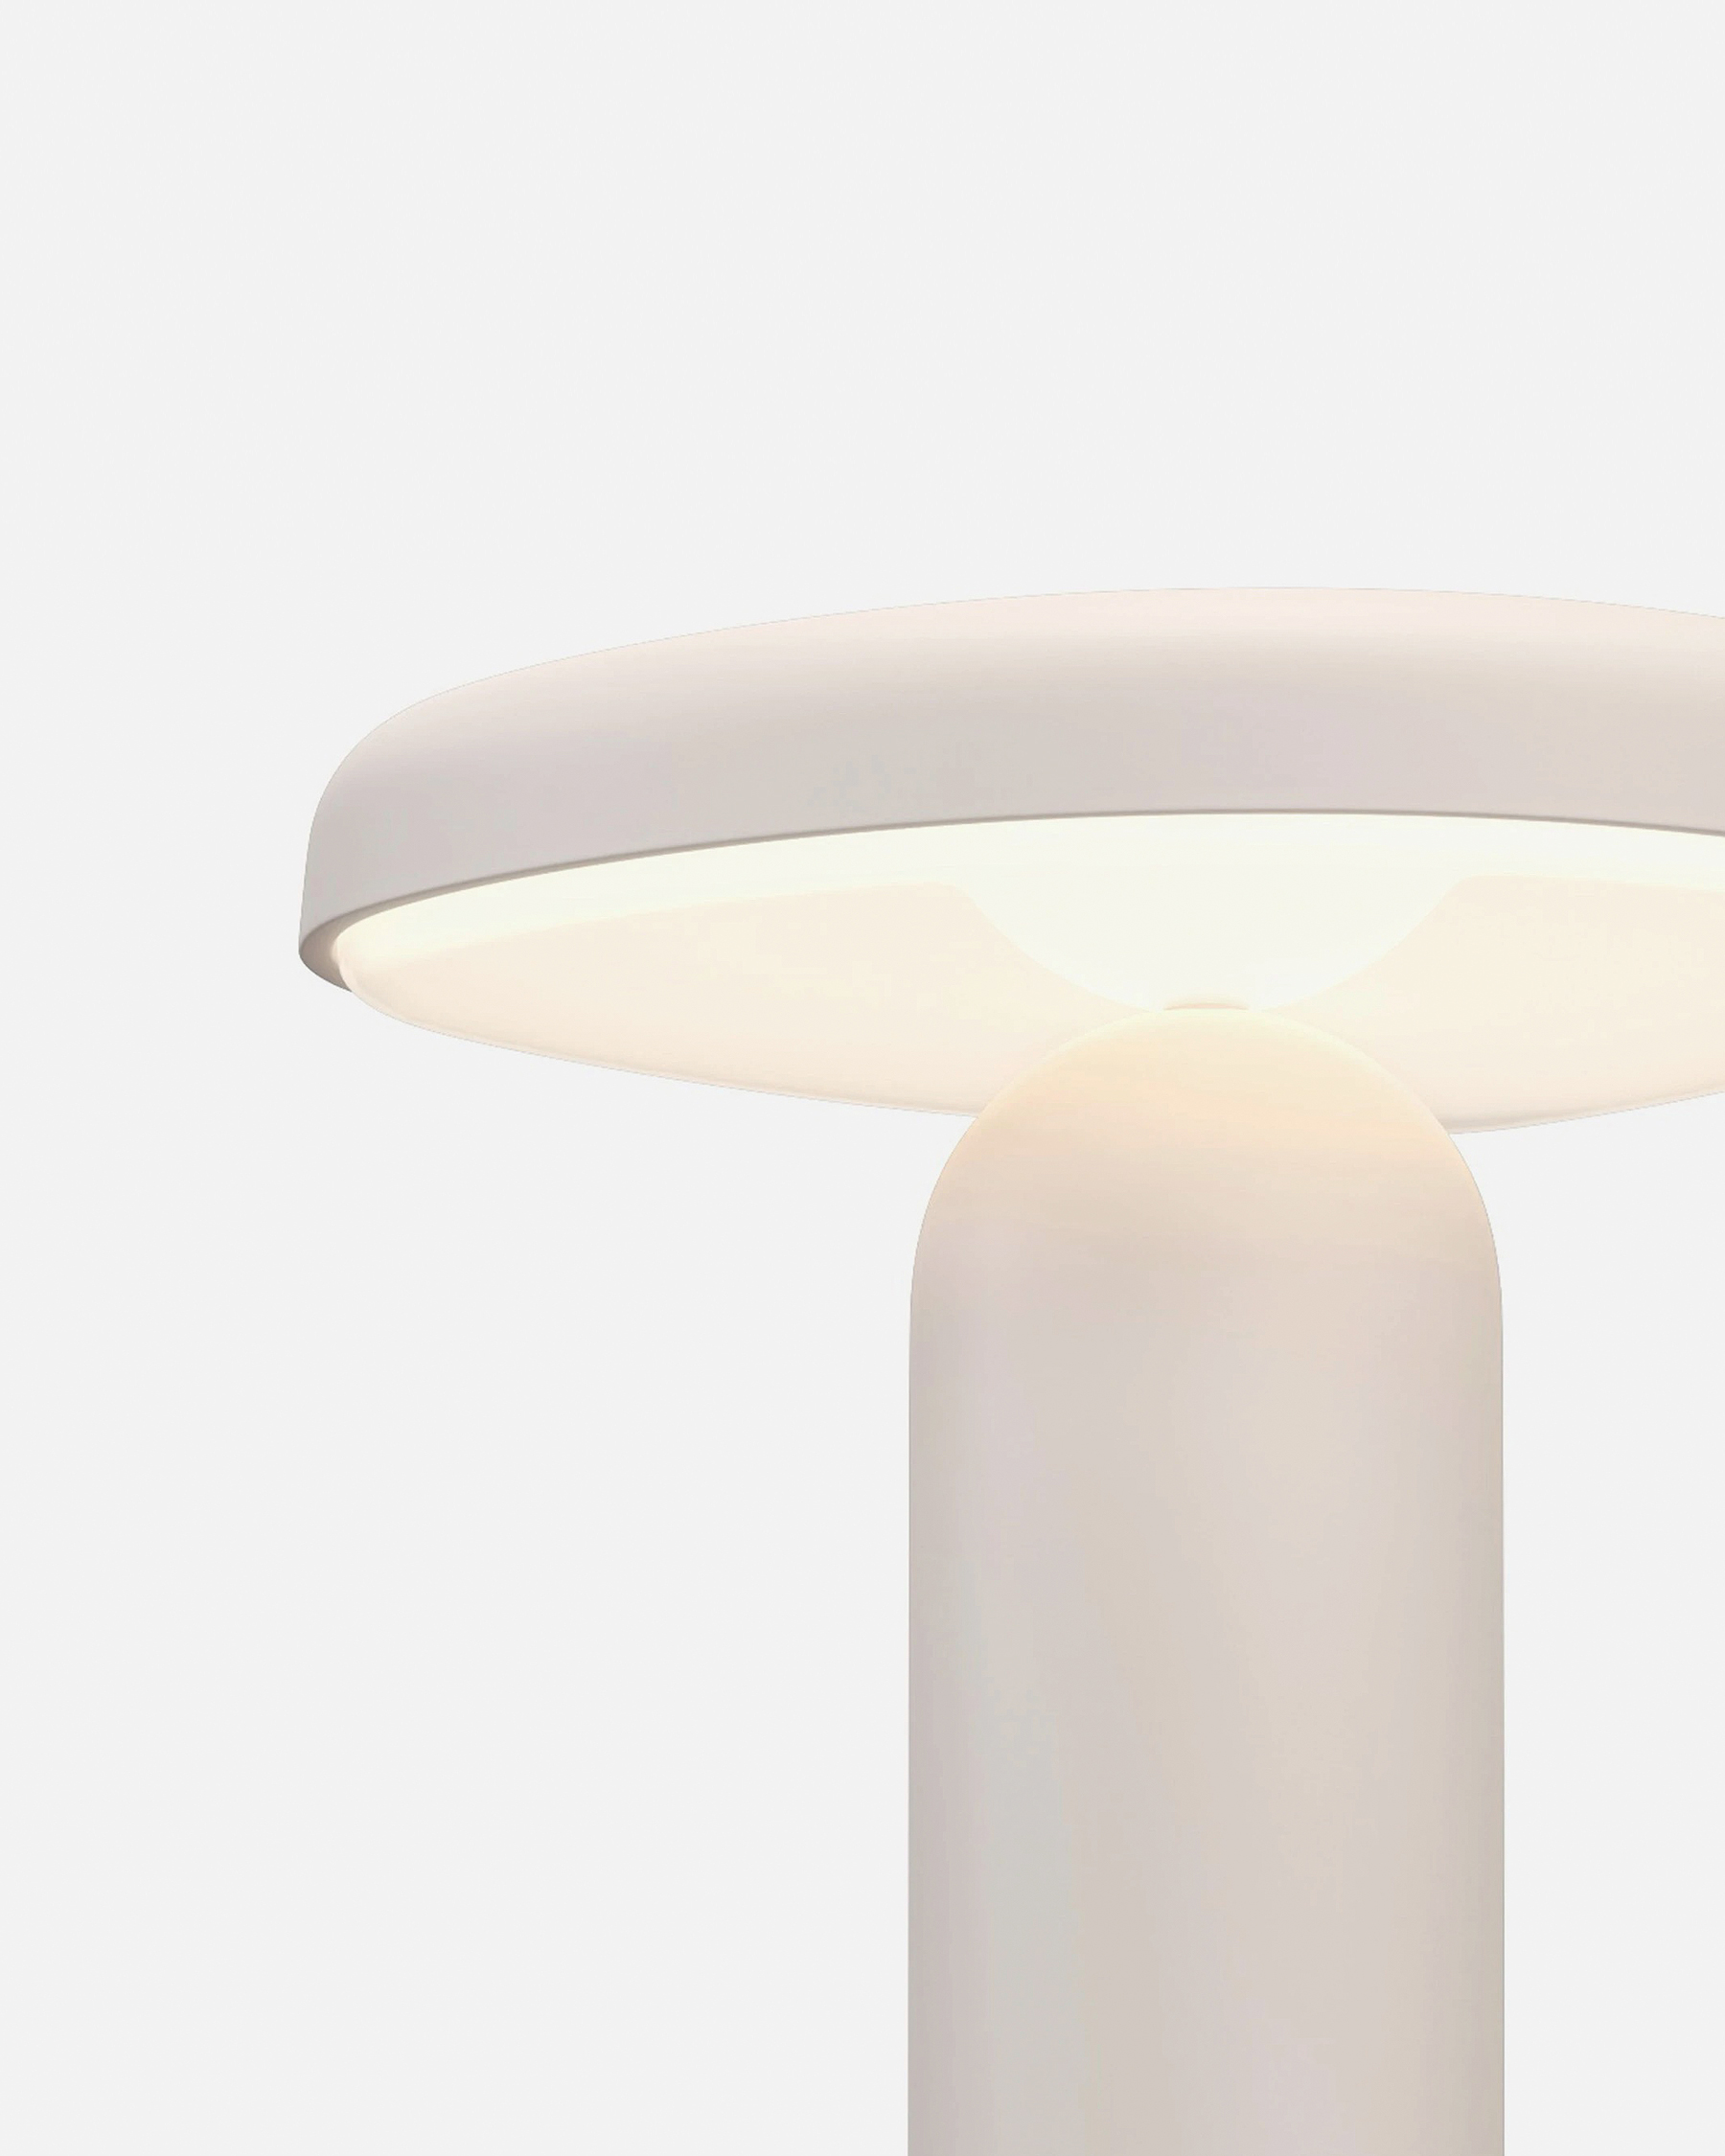 Fungi Lamp Collection by Guilherme Wentz